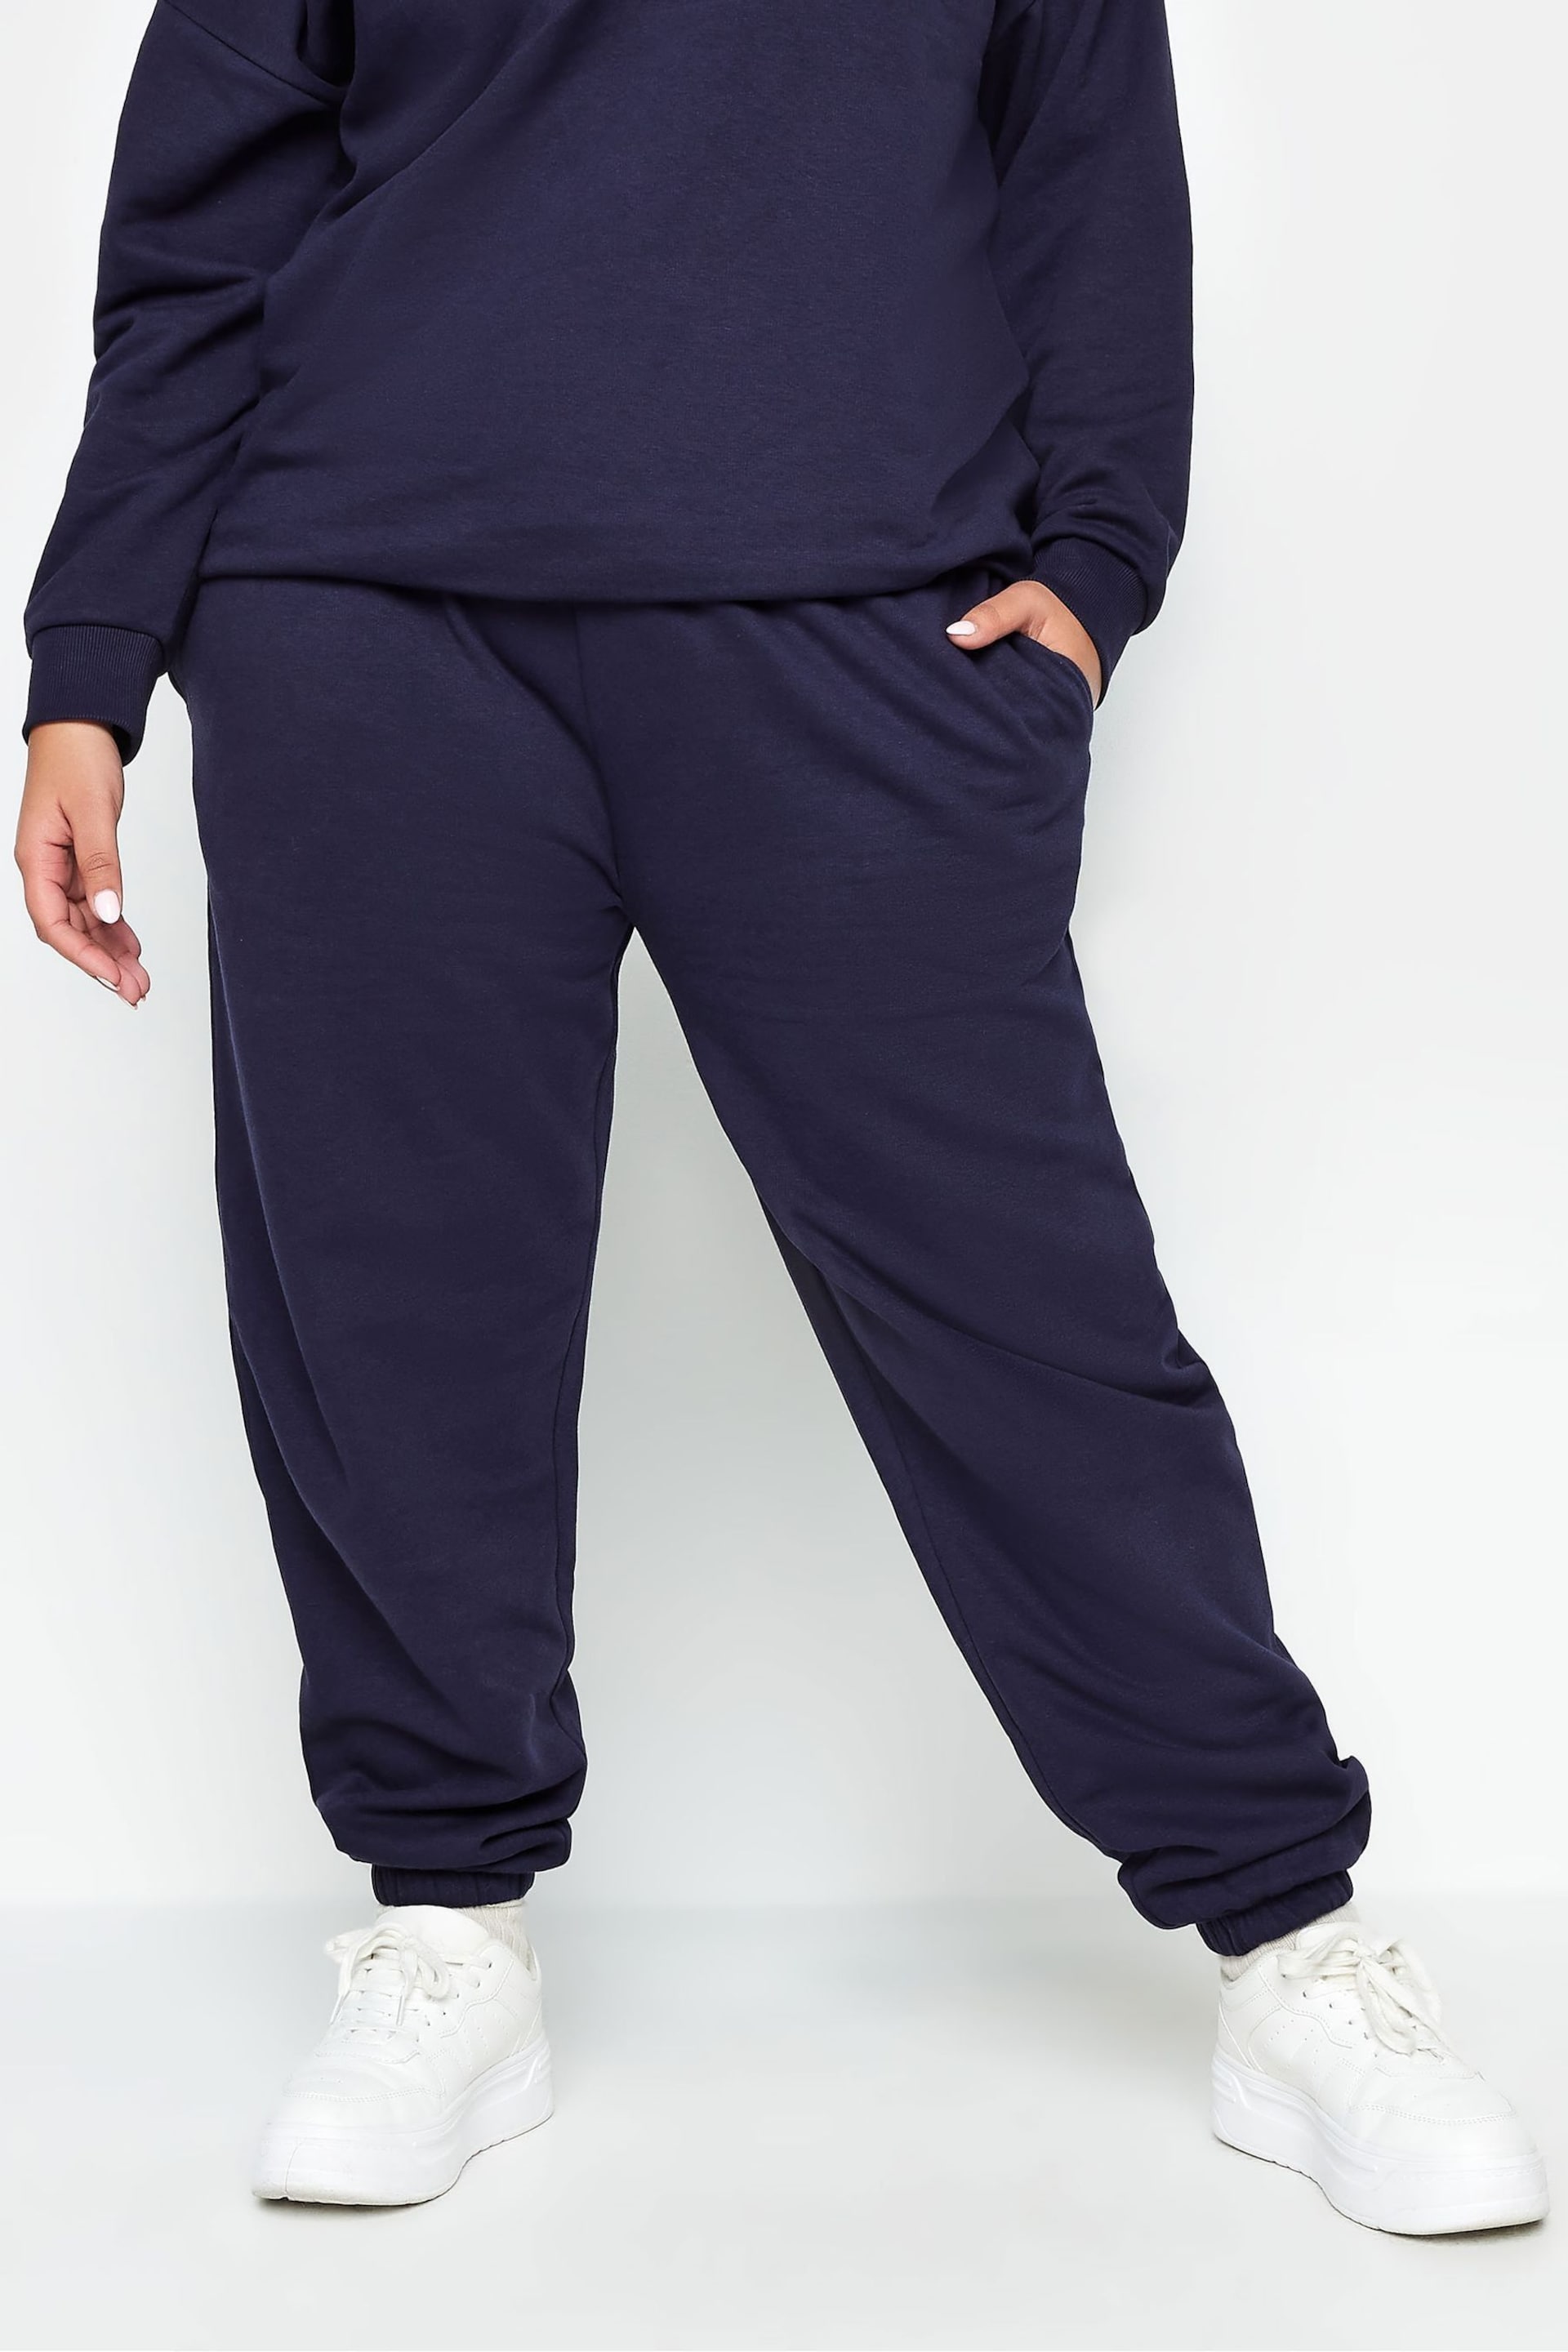 Yours Curve Blue Joggers - Image 1 of 4